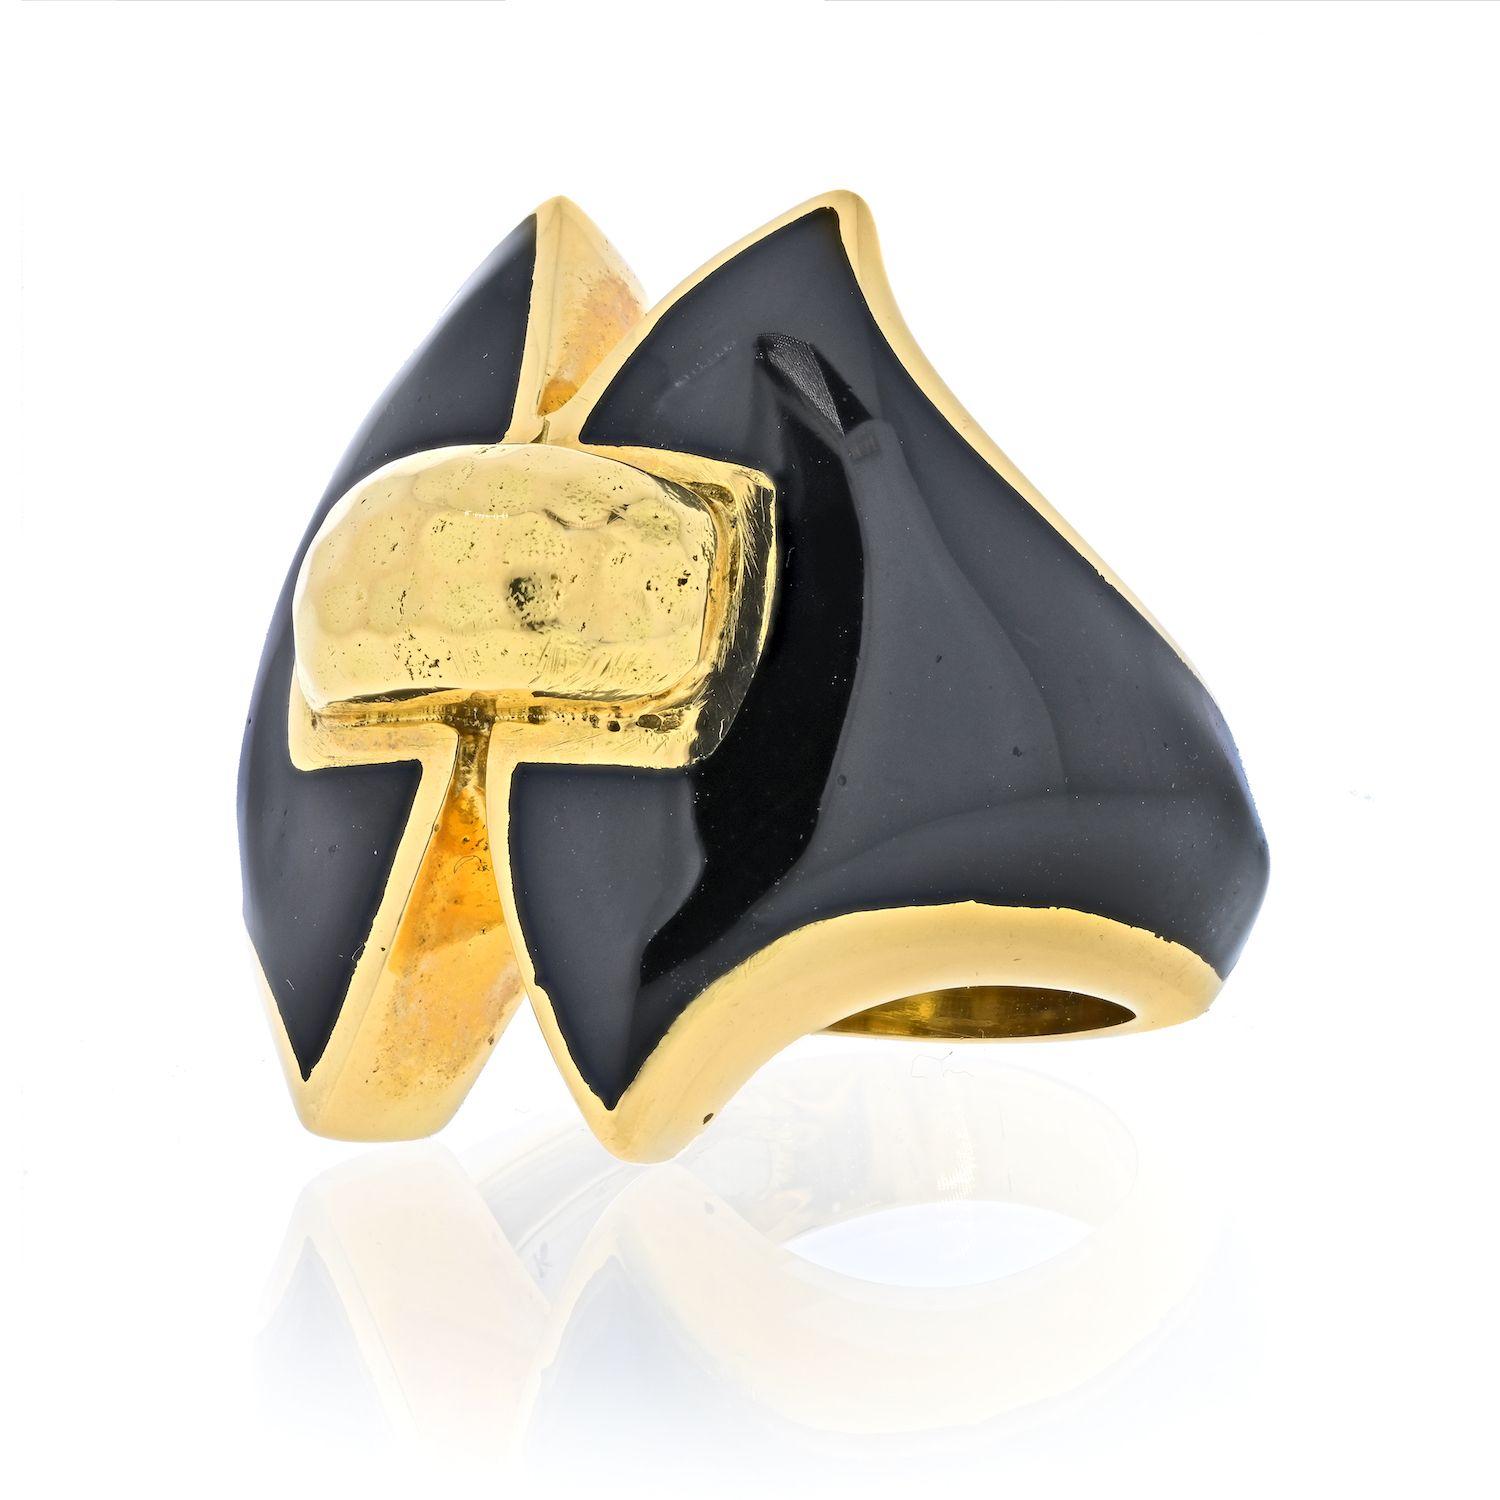 David Webb 1970 Vintage Cocktail Ring In 18 Kt Yellow Gold with Black Enamel. Made at the atelier of David Webb in New York city, back in the early 1970's. It was crafted in solid yellow gold of 18 karats, with hammered finish details and